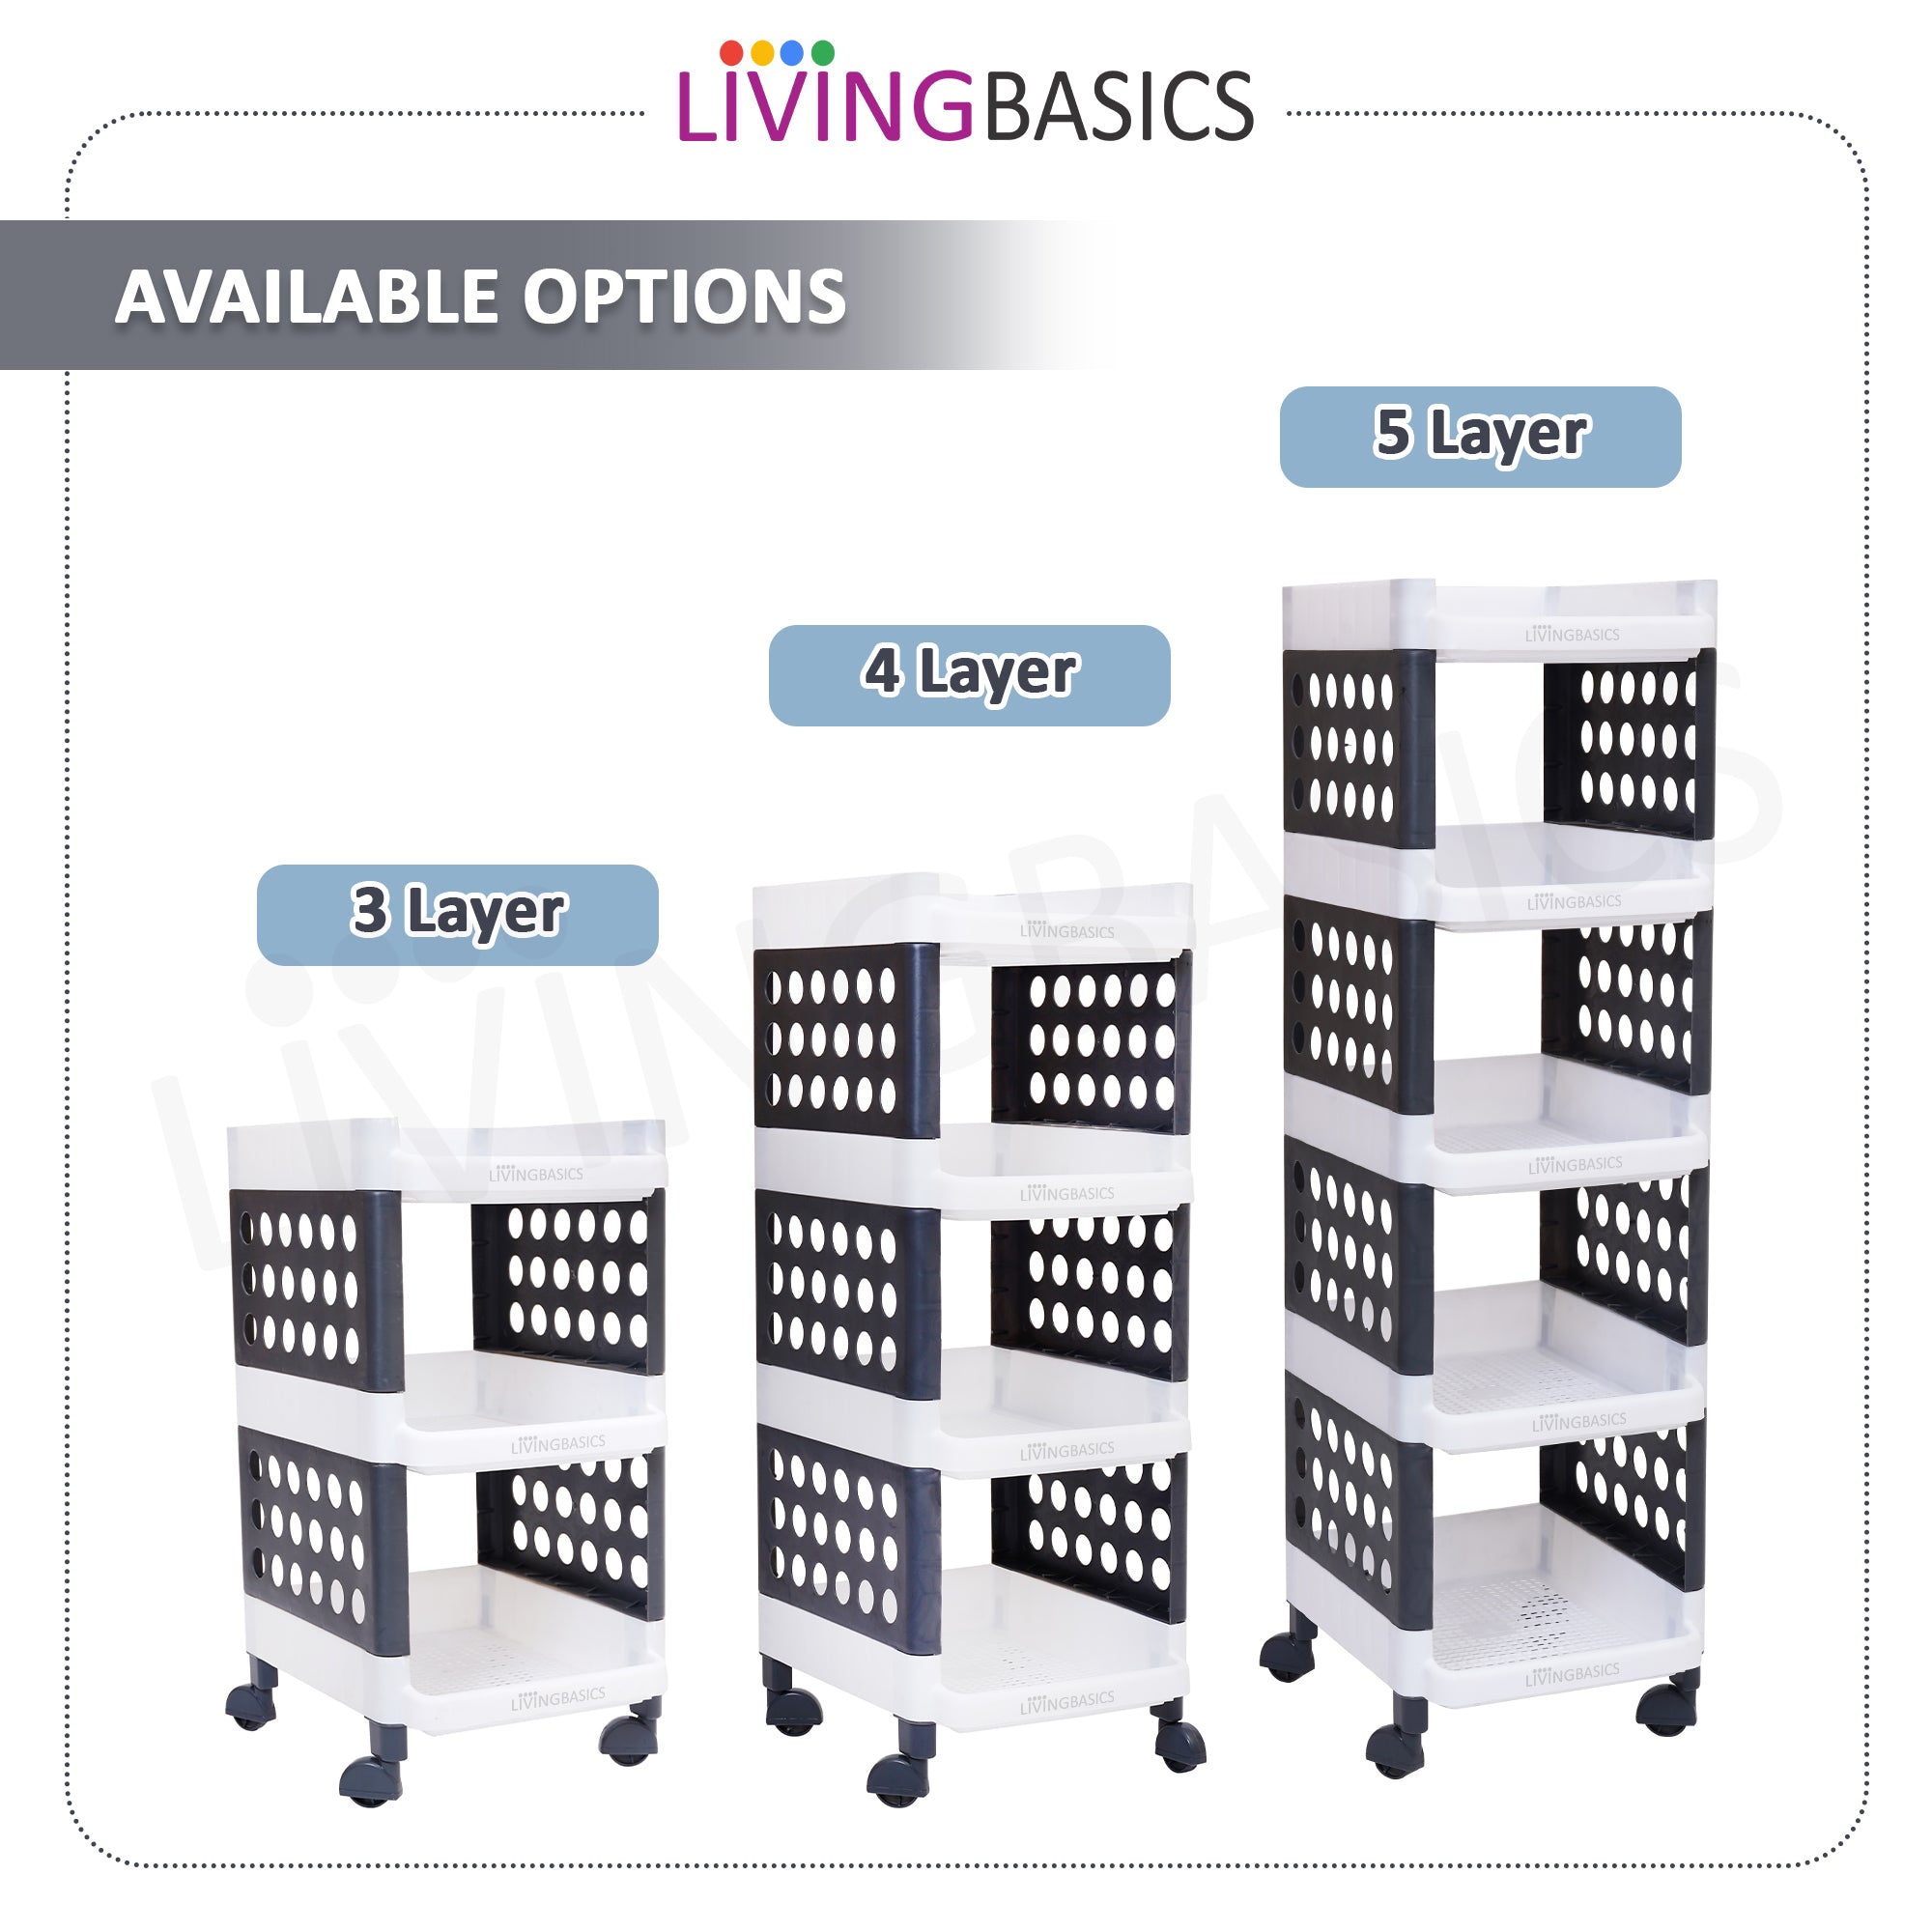 LivingBasics 5 Layer/Tier Multipurpose Plastic Storage Rack/Stand Organizer with Wheels, Space-Saving Utility Trolley for Narrow Places/Kitchen Cart/Vegetable Rack/Corner Shelf/Bedroom/Bathroom/Living Room/Office/Kids Toys (White - Grey)